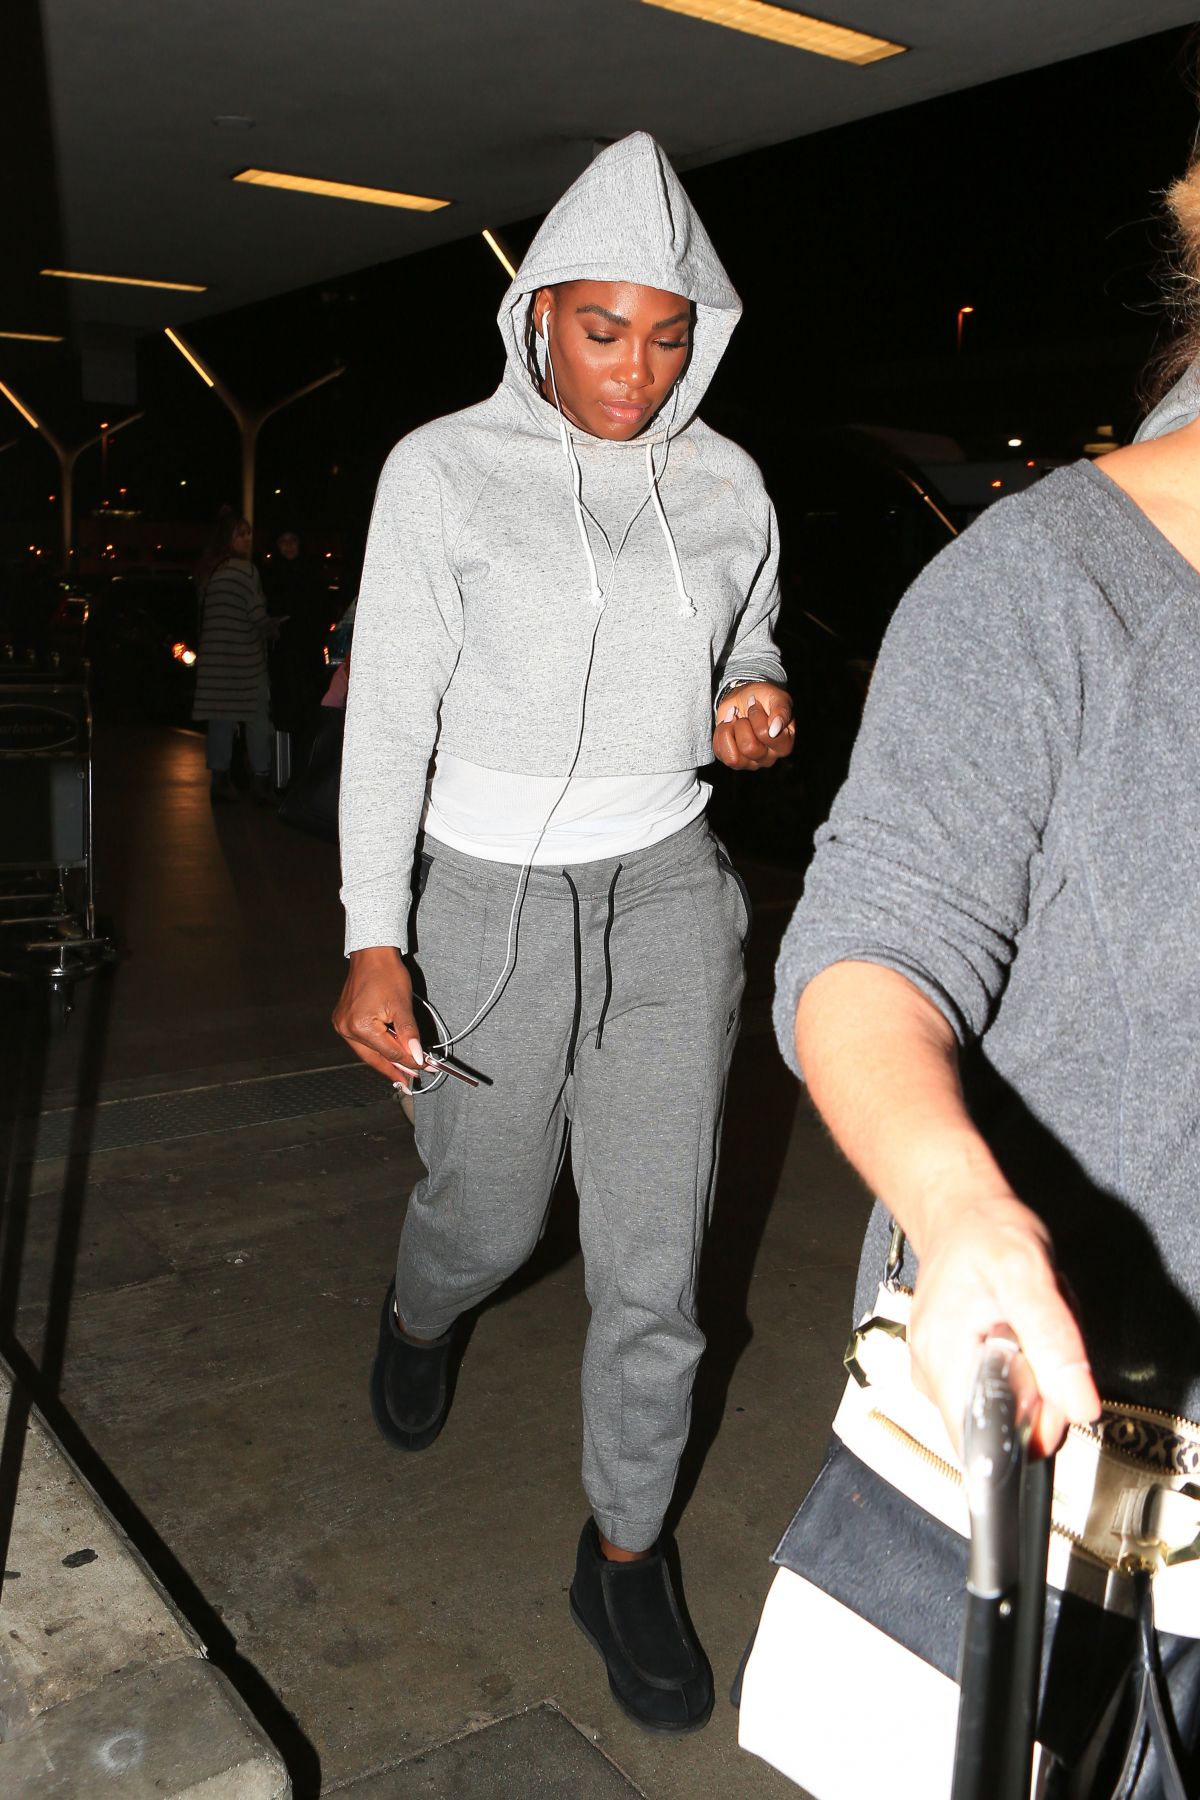 SERENA WILLIAMS at LAX Airport in Los Angeles 11/04/2016 – HawtCelebs